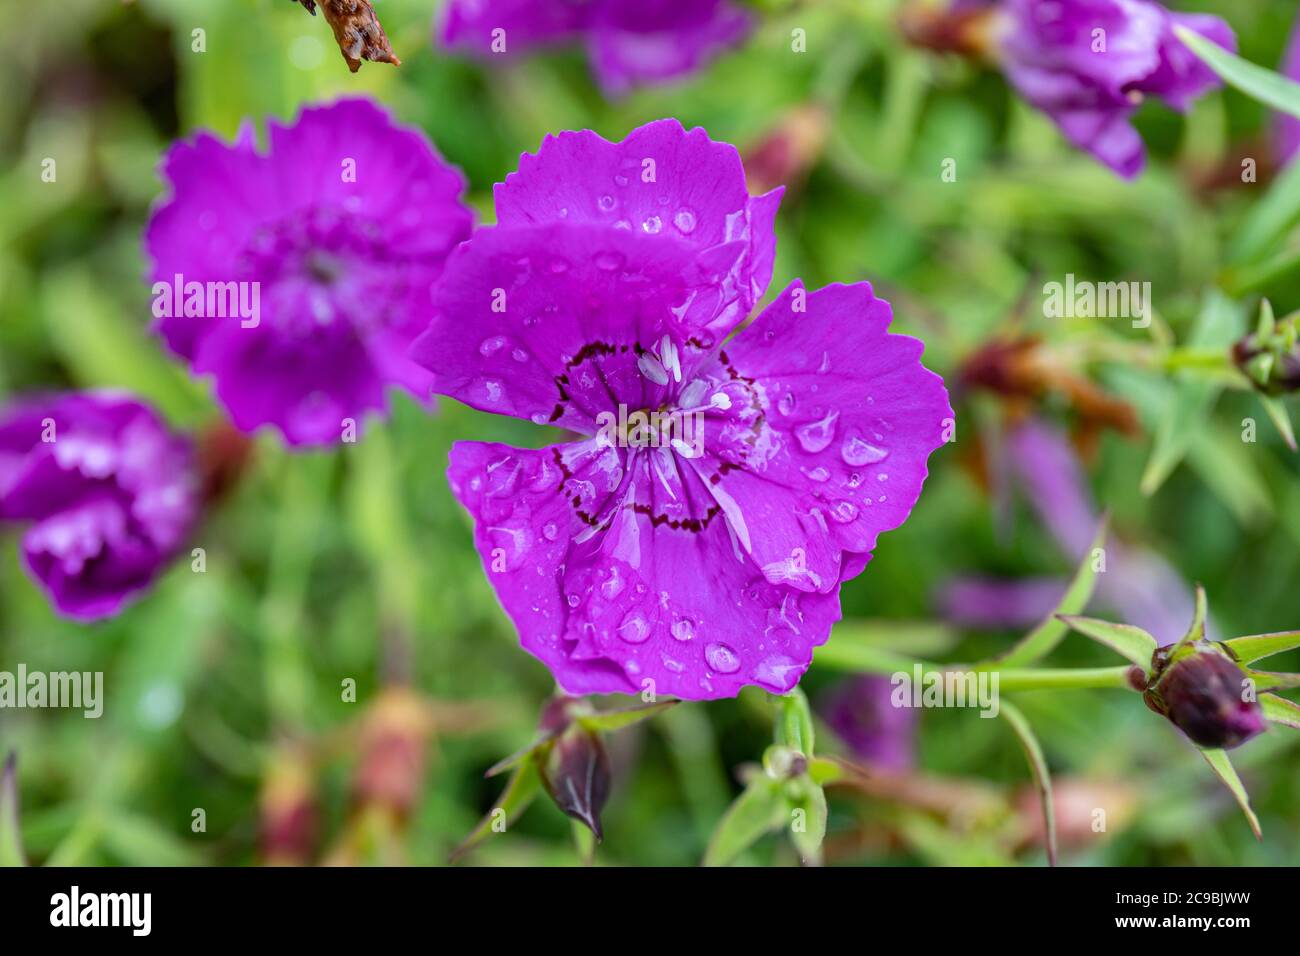 Closeup of Dianthus chinensis, commonly known as rainbow pink or China pink, flower on a rainy day Stock Photo